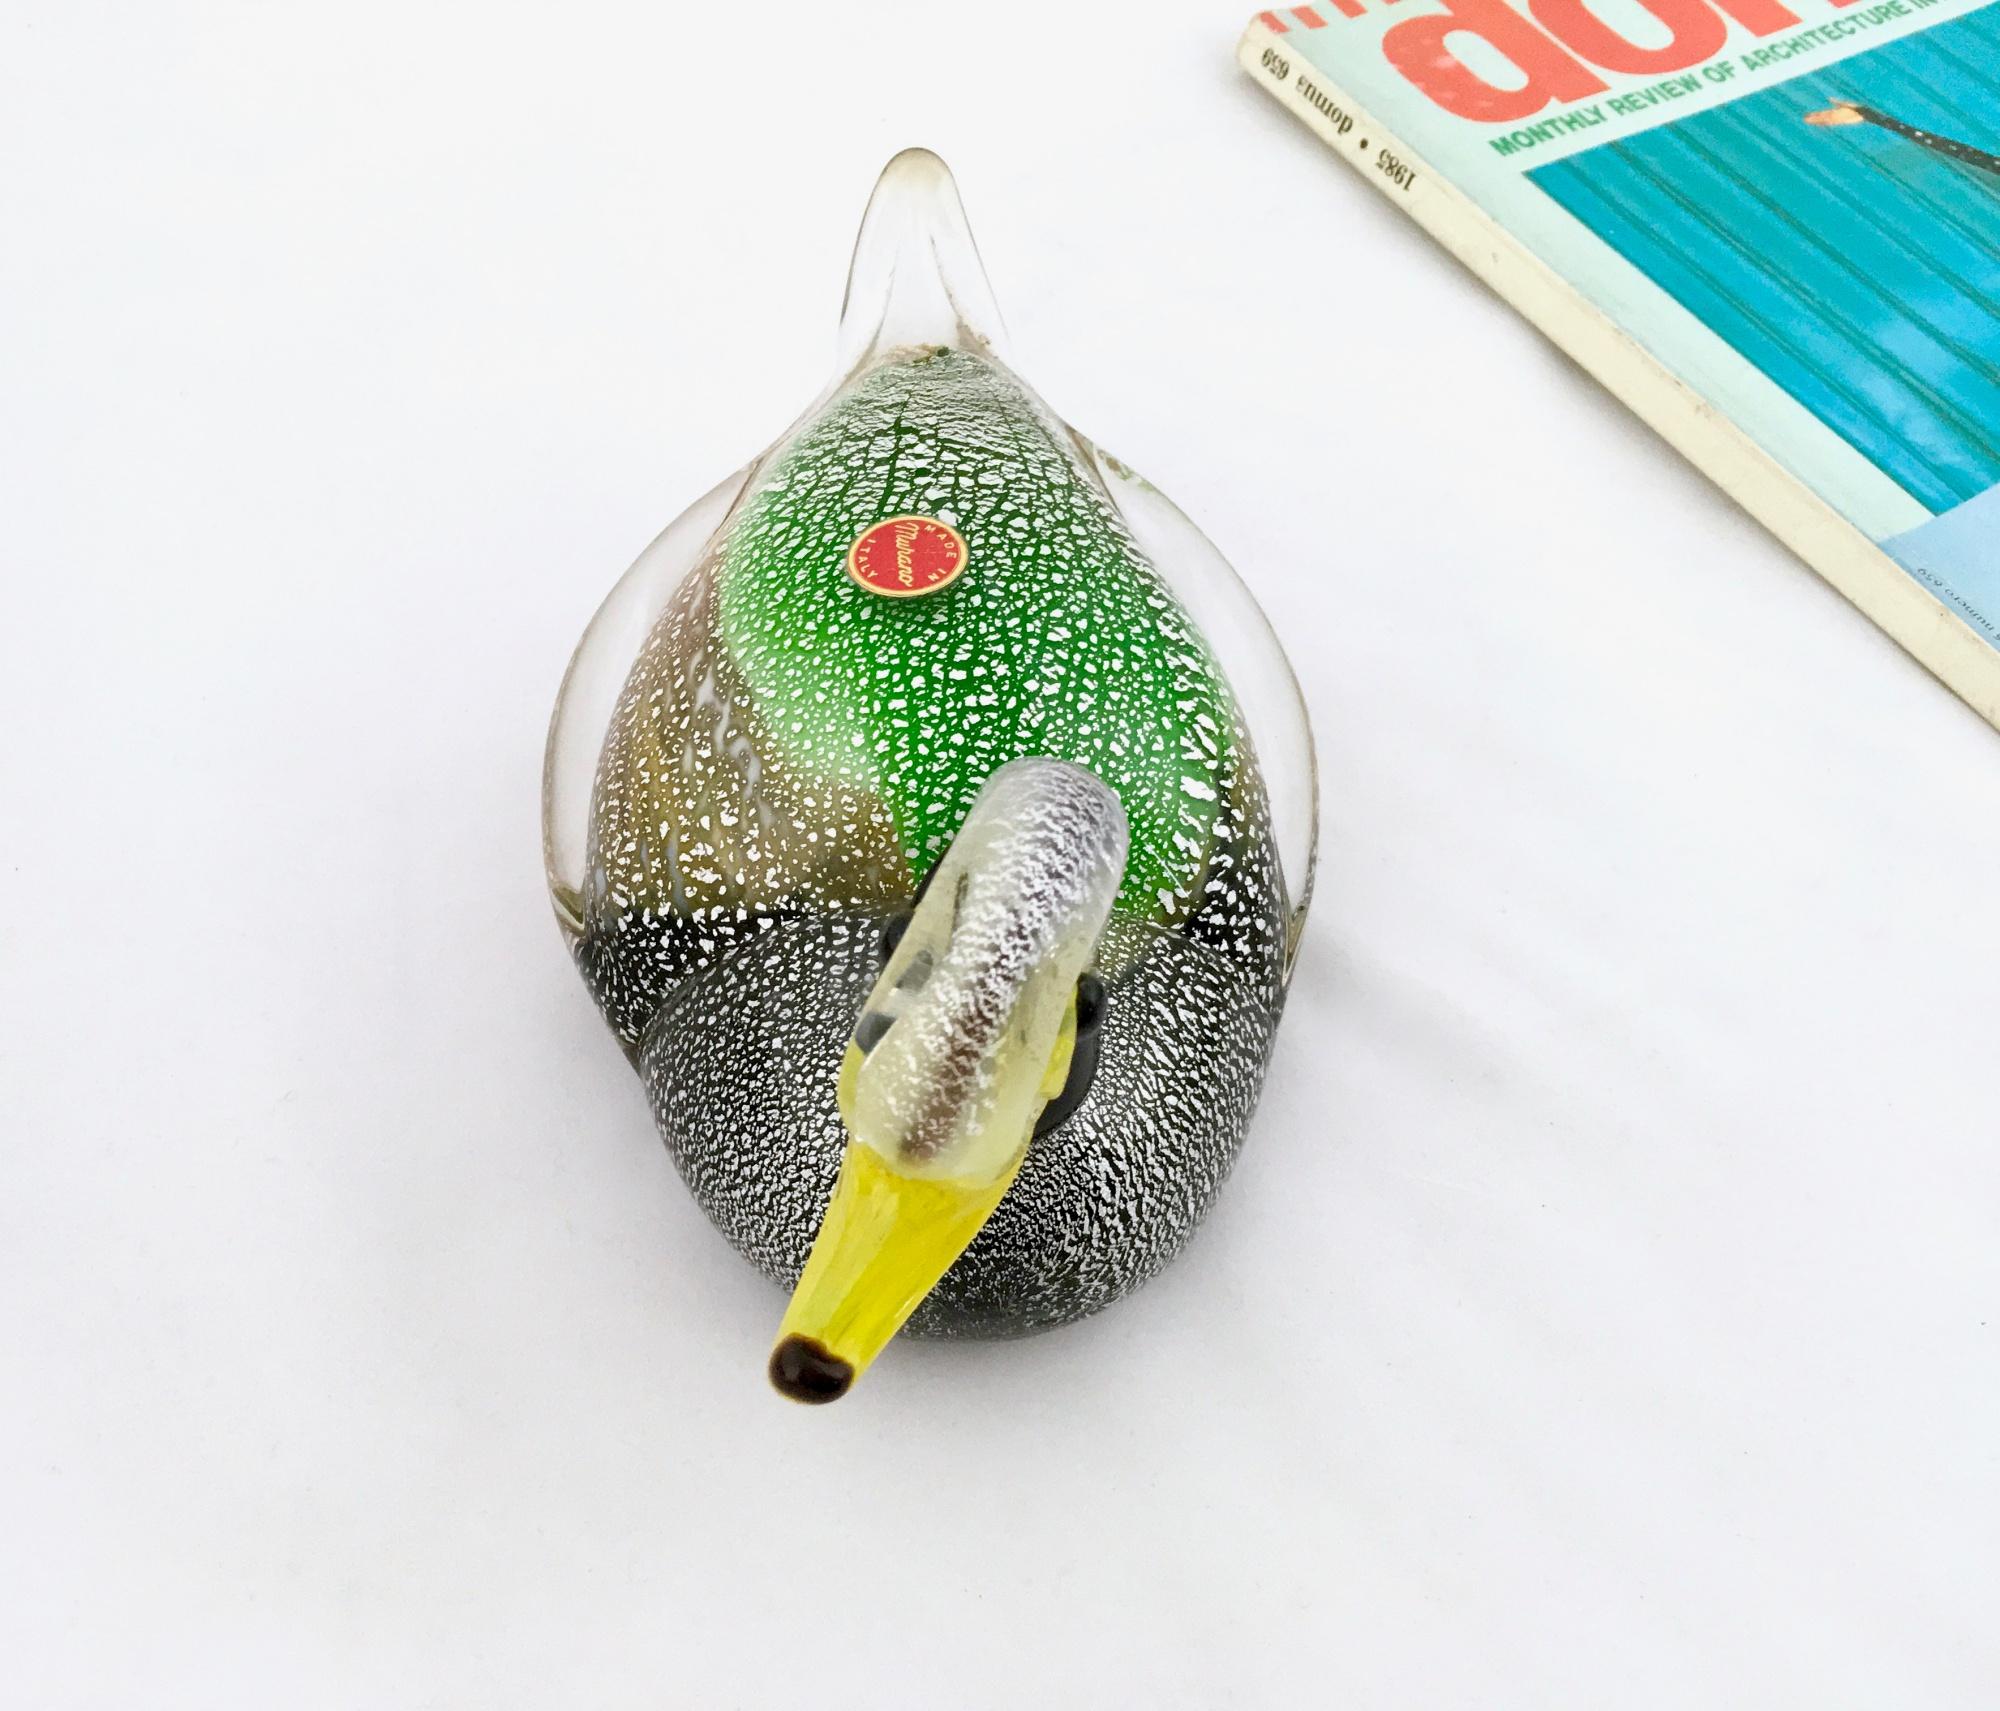 Mid-20th Century Murano Glass Duck with Silver Flakes, Italy, 1950s-1960s